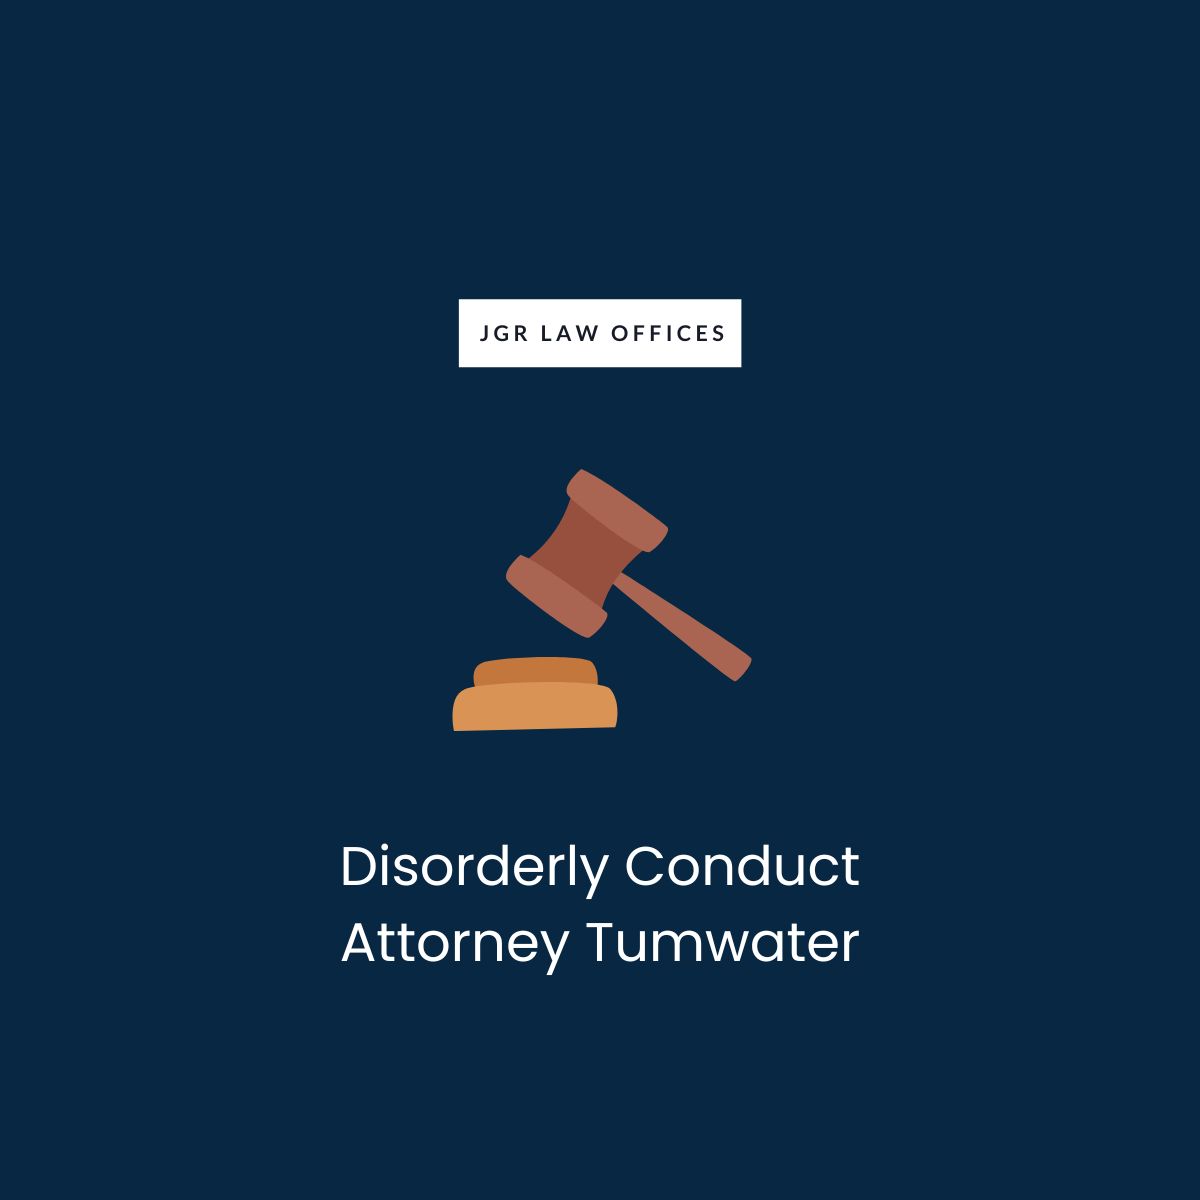 Disorderly Conduct Attorney Tumwater